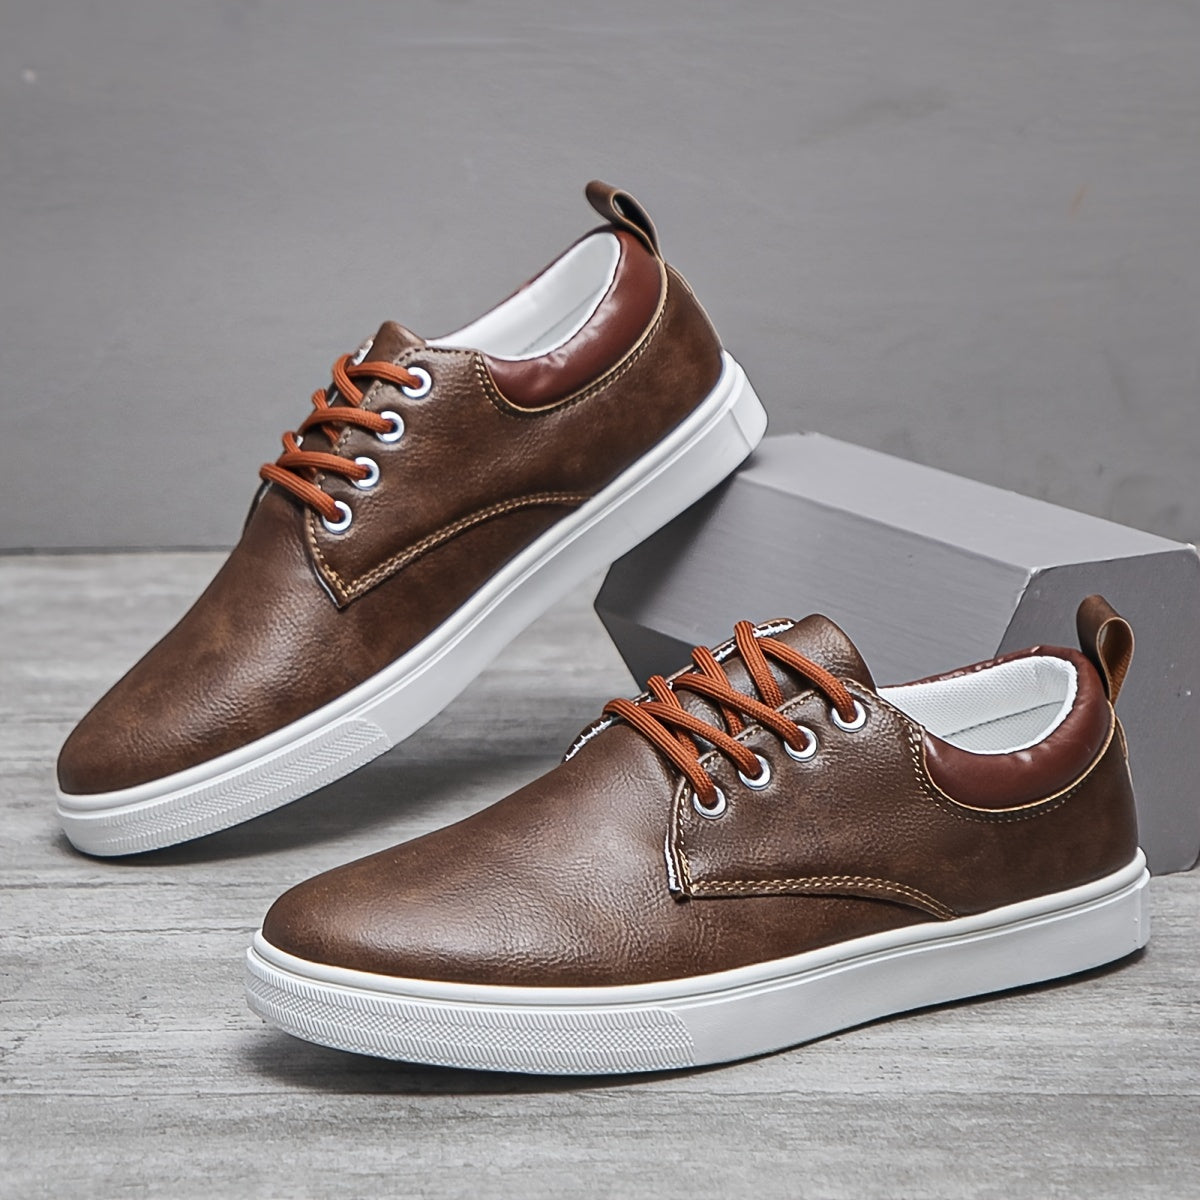 Comfy Non-Slip Solid Skate Shoes - Men's Lace-Up Casual Sneakers for Outdoor Activities